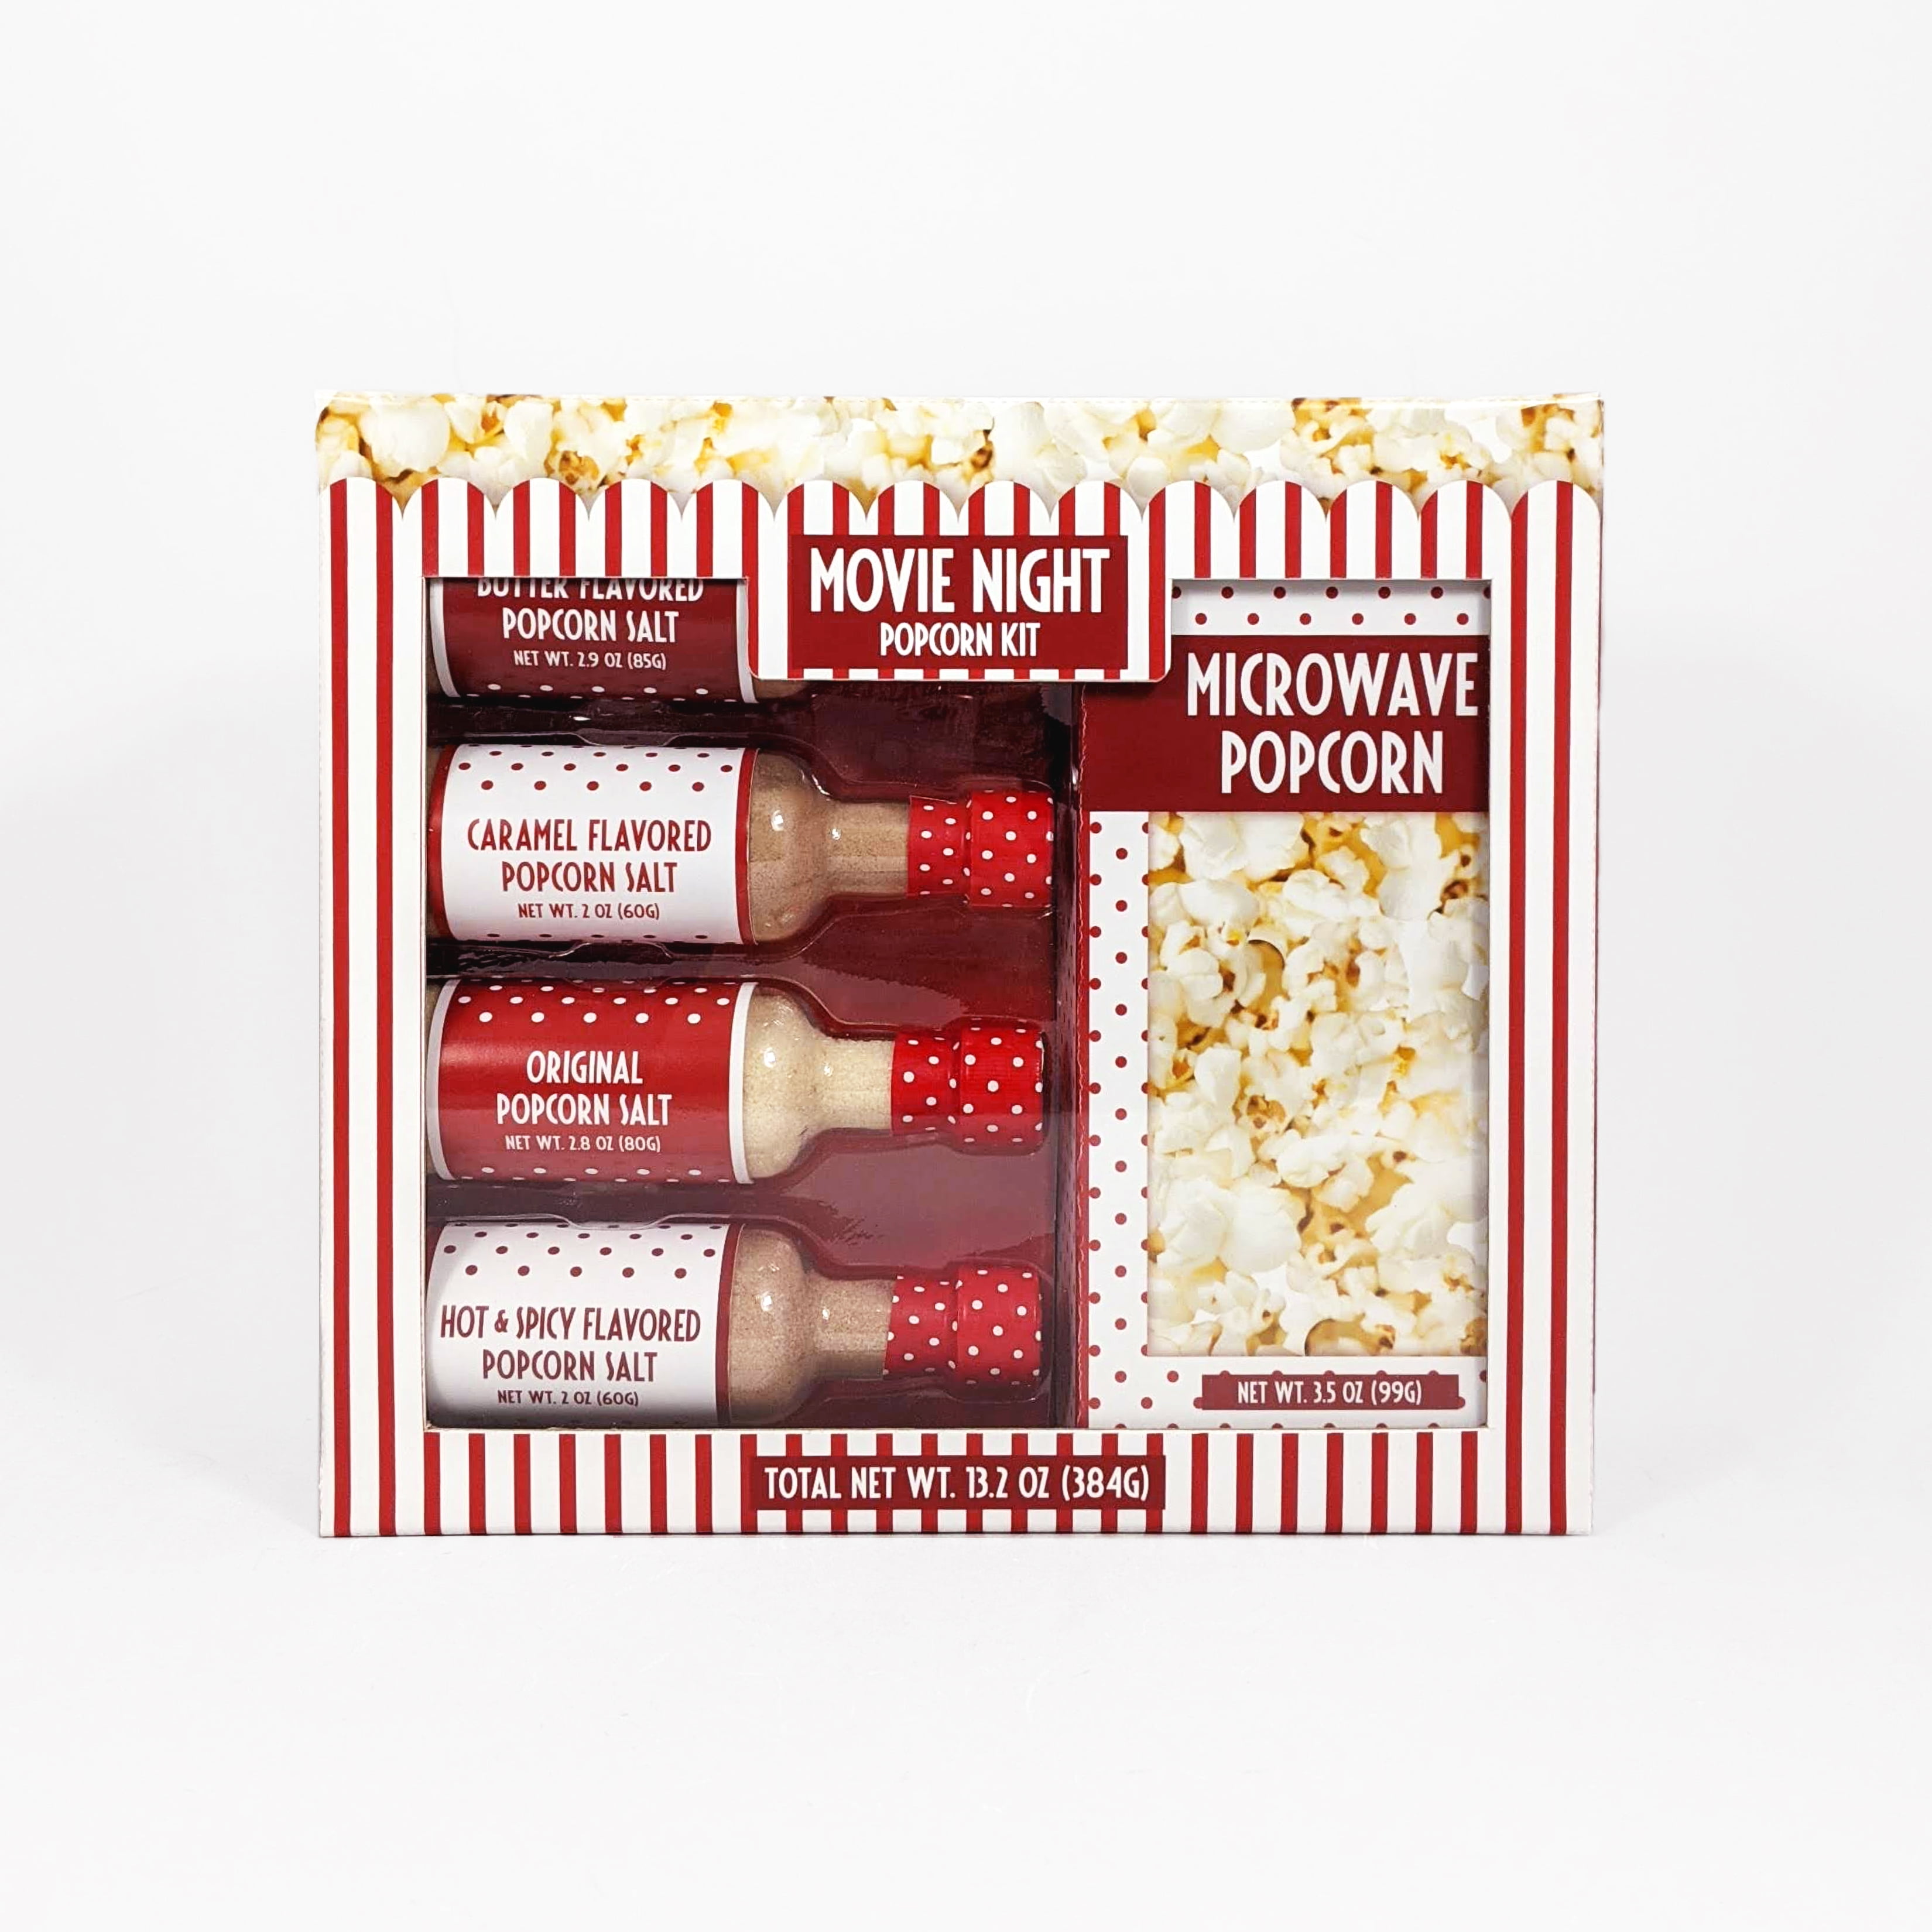 Movie Night Popcorn Kit includes Microwave Popcorn and Assorted Flavored Seasoning Salts